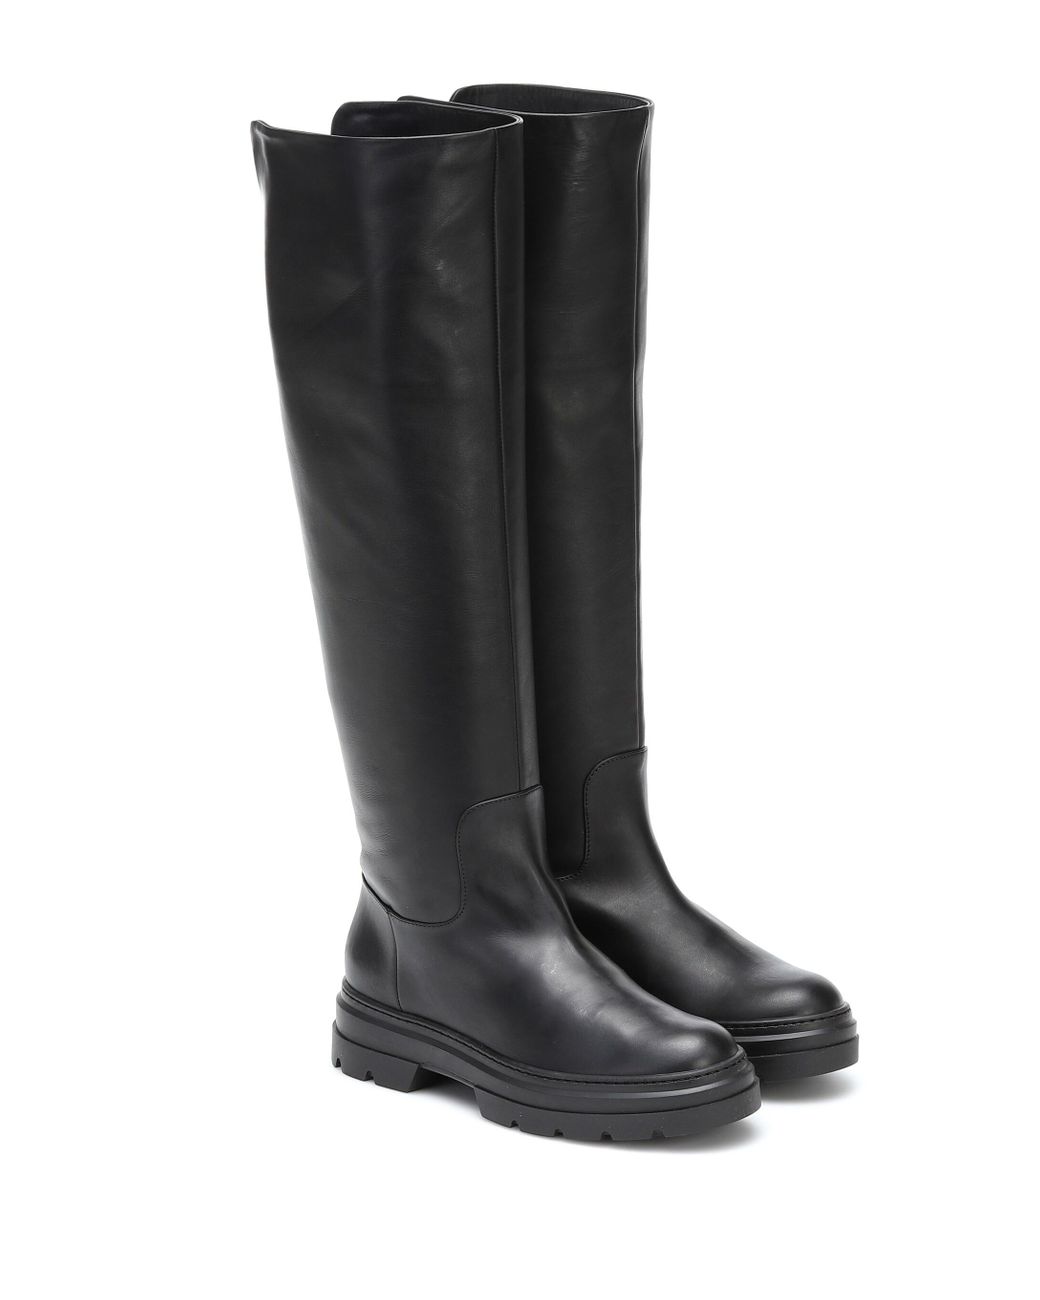 Max Mara Leather Knee-high Boots in Black - Lyst